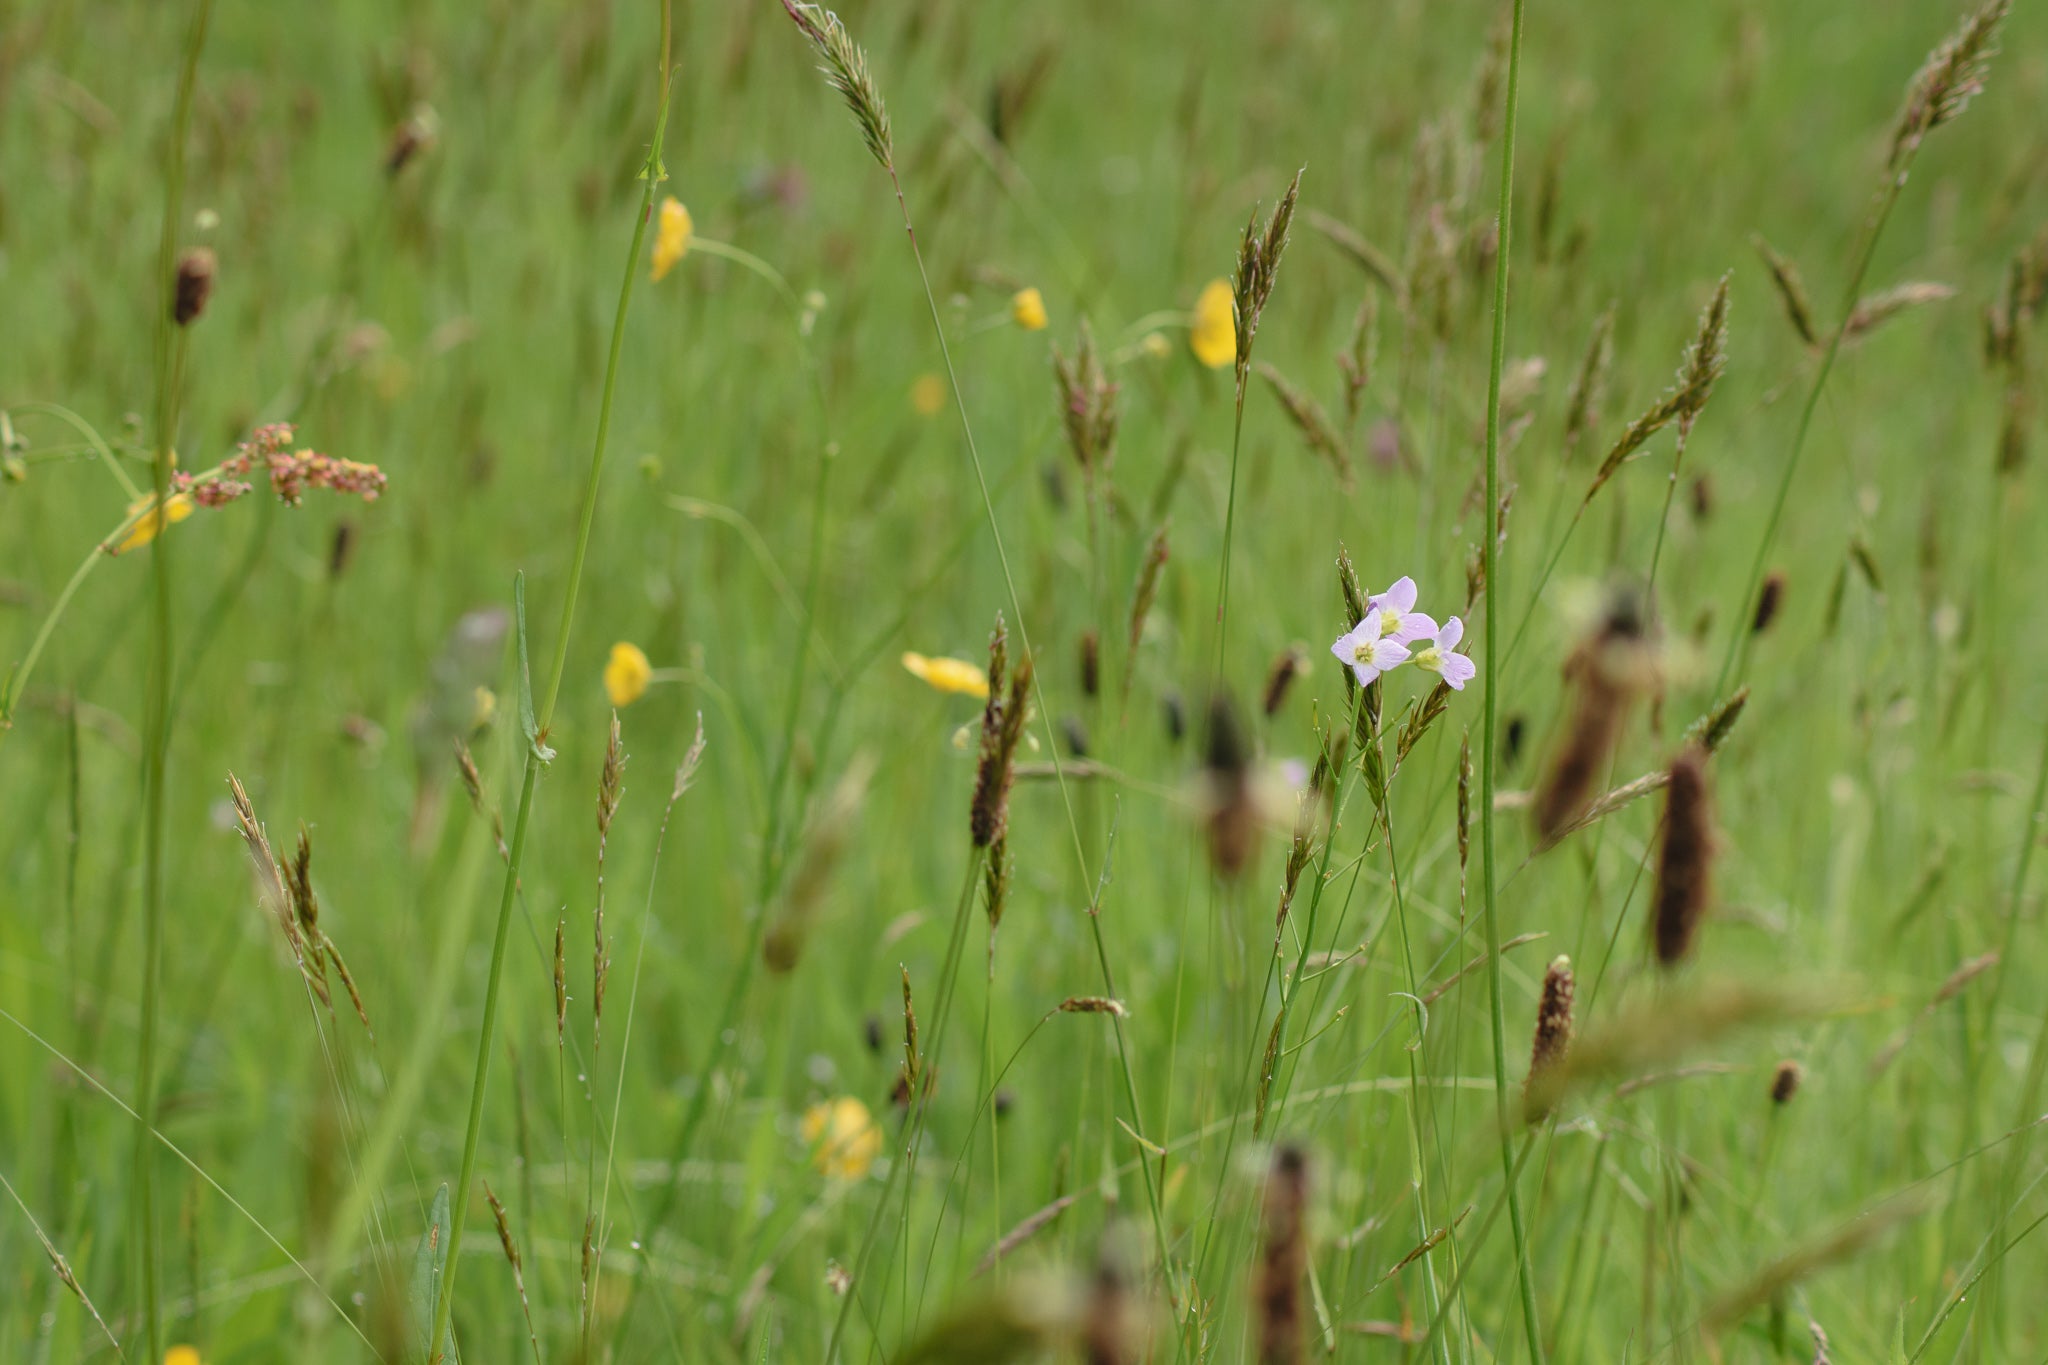 meadow grasses and cuckoo flower